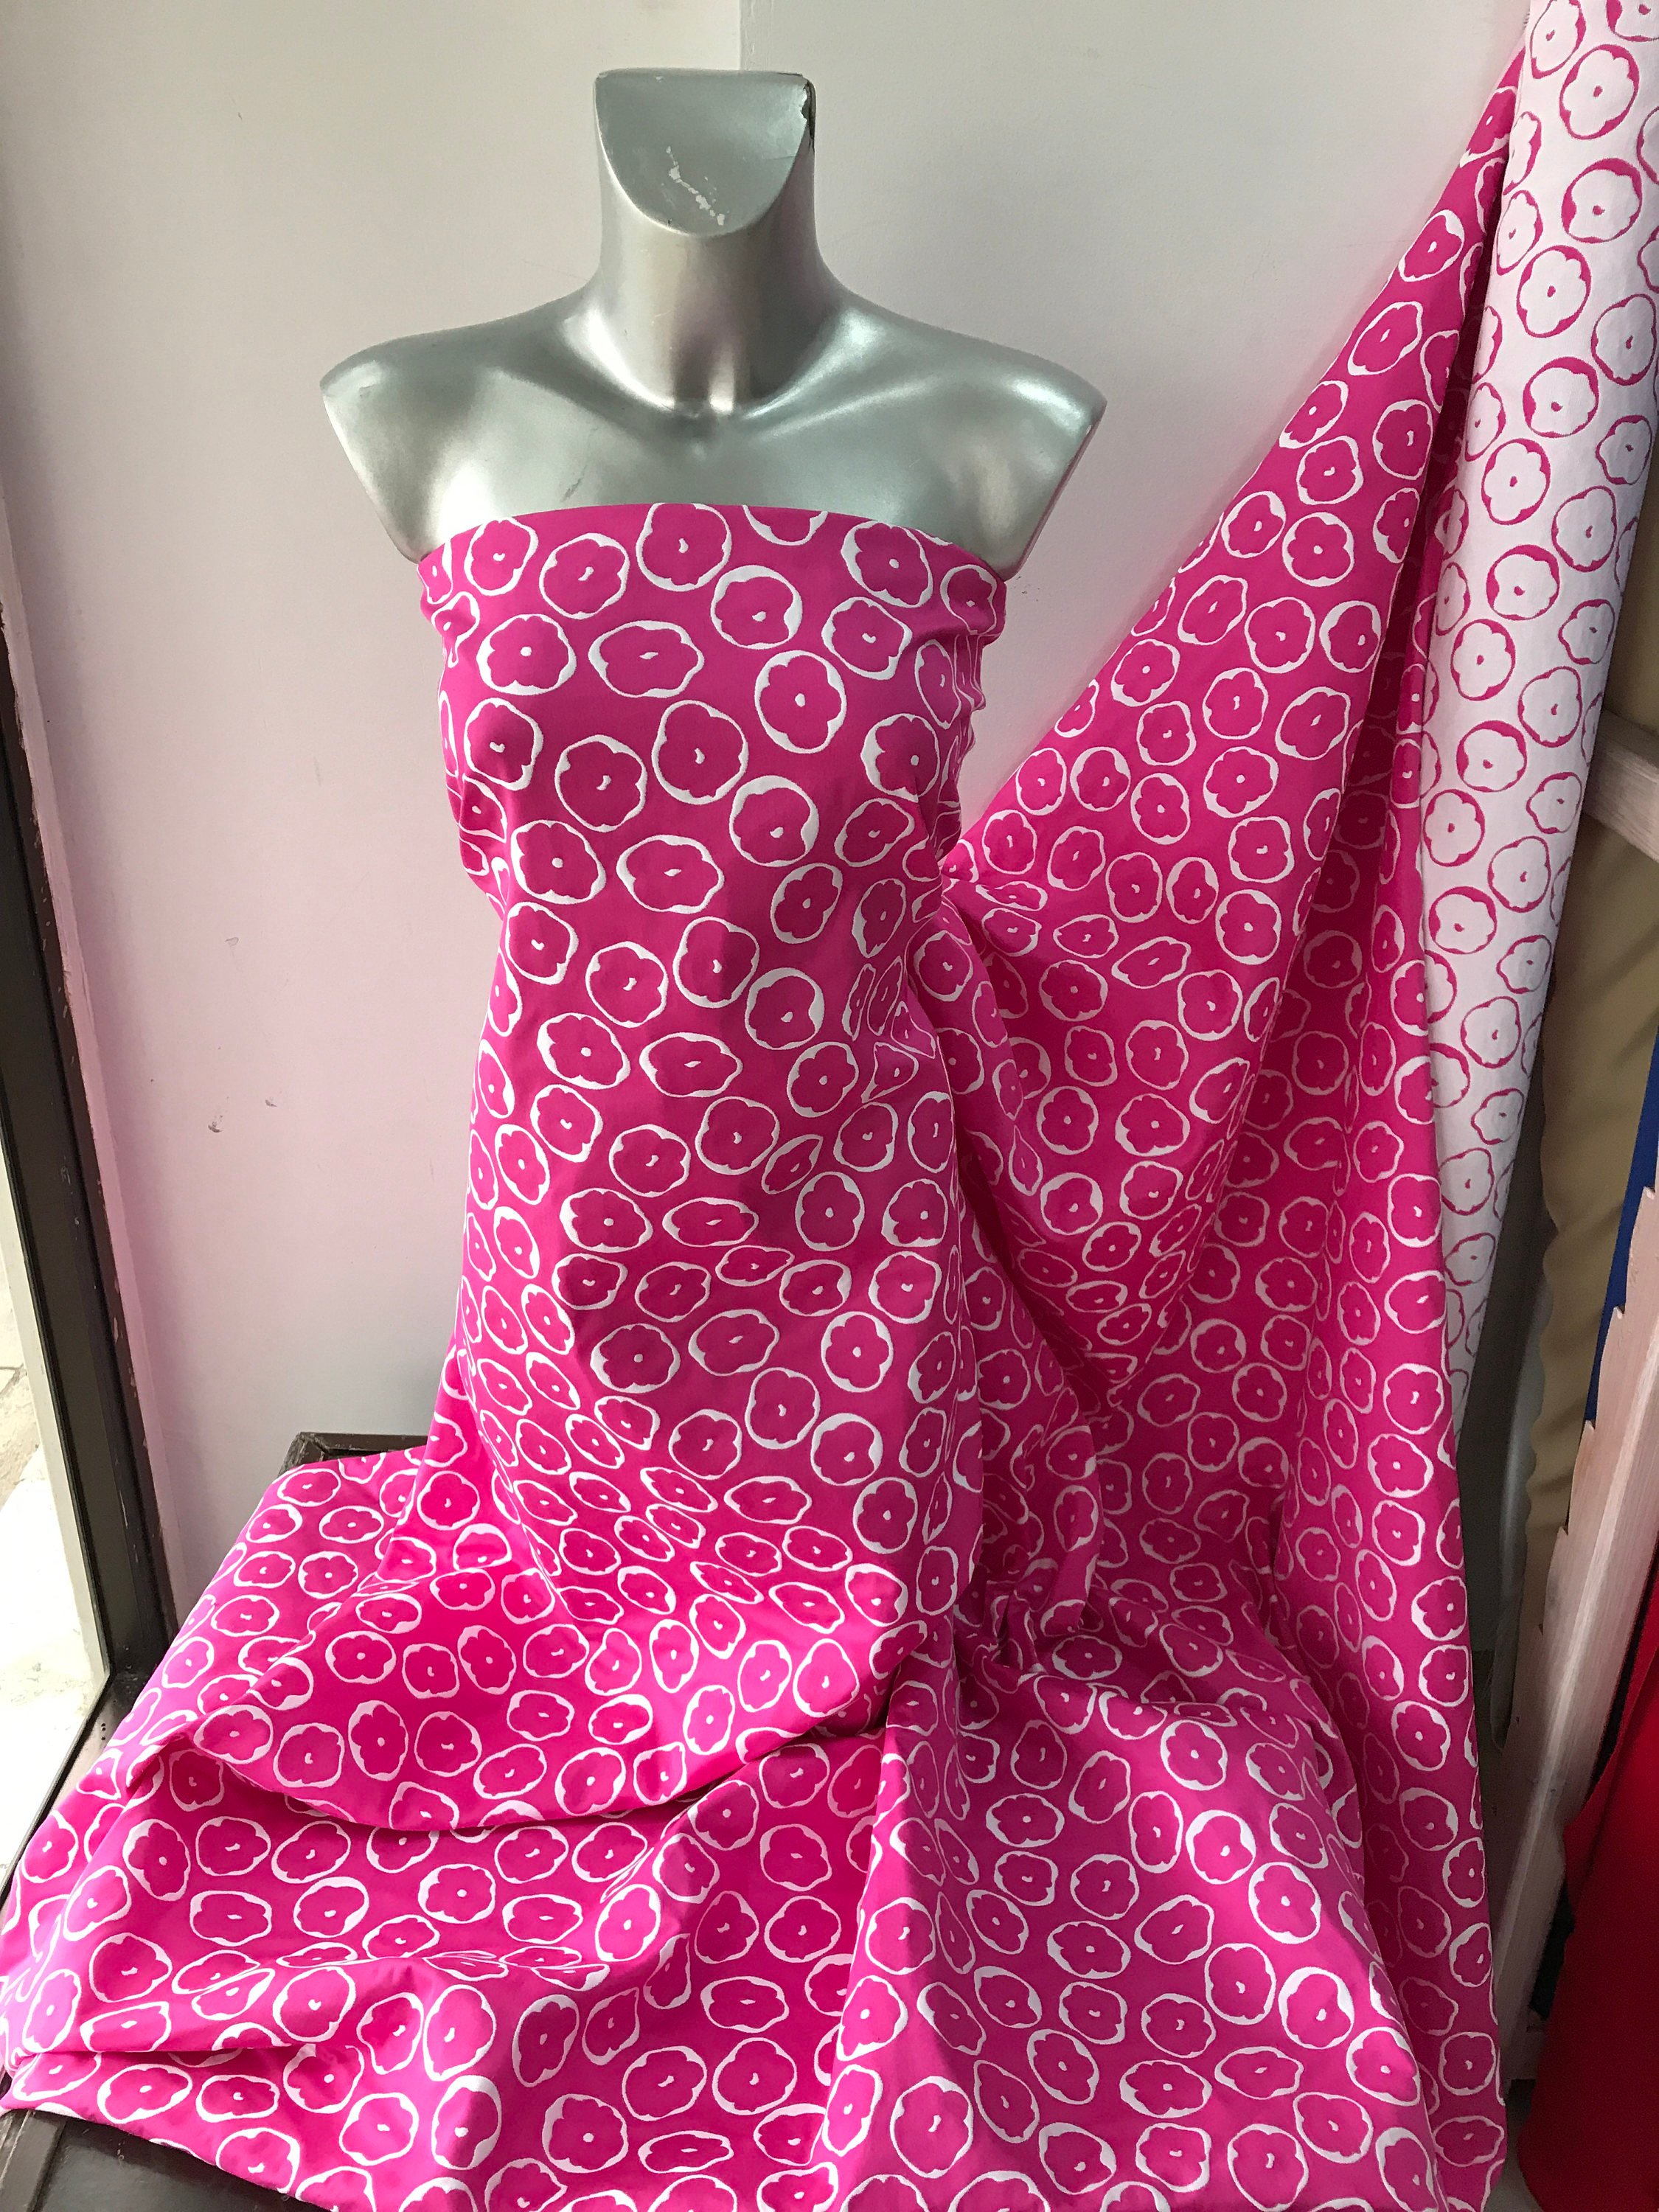 cotton jacquard fabric floral print pink fuchsia and white thick stiff shift dress formal summer suiting bridal 140cm made in Italy